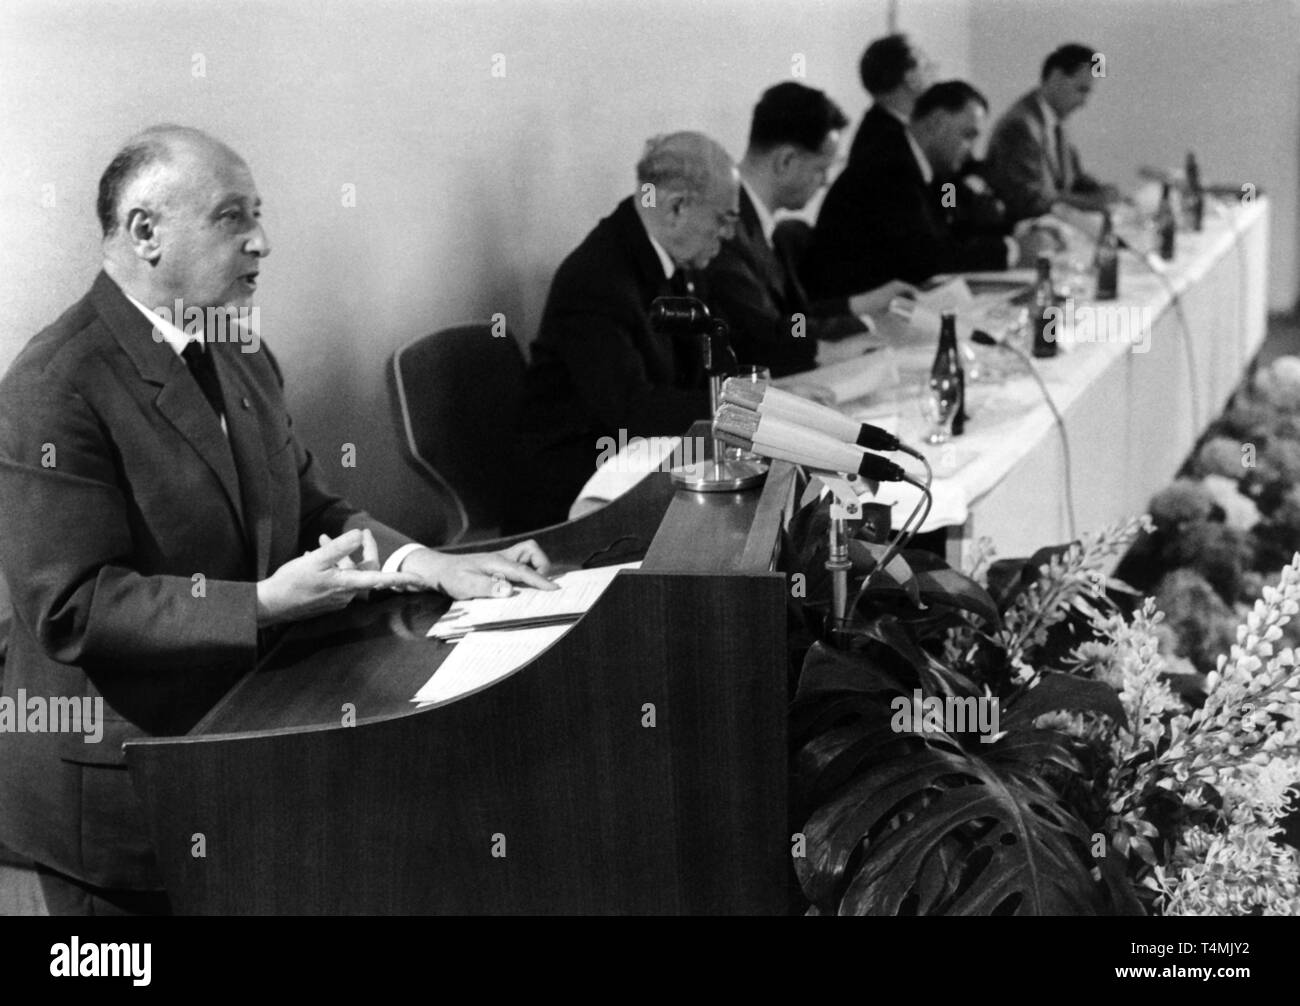 Professor Albert Norden (FRONT), member of the politburo of the Central Committee of the GDR and of the executive committee of the National Council, pictured during his speech during a press conference of the National Front of the German Democratic Republic in East Berlin on 29 June 1966. In the background, leading party deputies of the democratic block of the GDR are pictured:   Paul Scholz (L-R), Deputy of the Chairman of the Democratic Farmers' Party of Germany and Deputy Chairman of the Council of Ministers in the GDR,   Dr. Manfred Gerlach, Secretary General of the Liberal Democratic Part Stock Photo